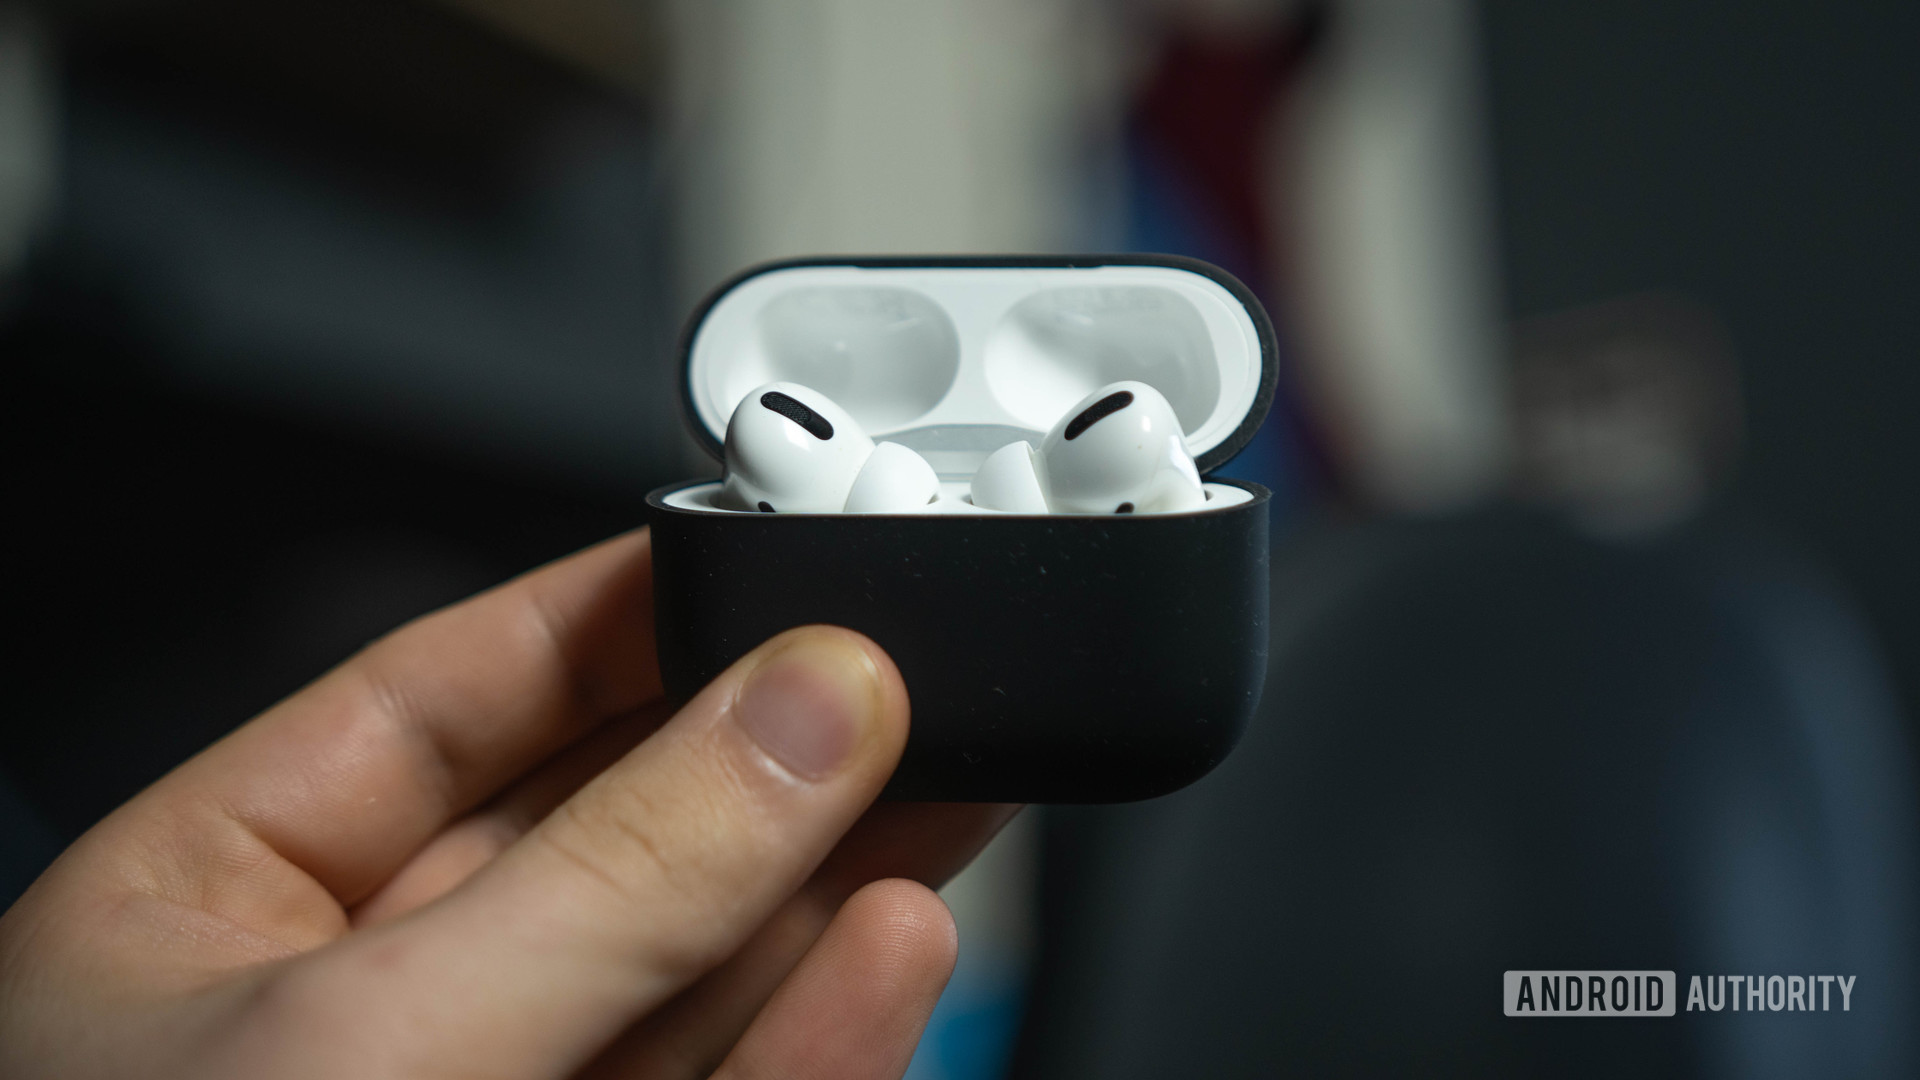 AirPods Pro with case